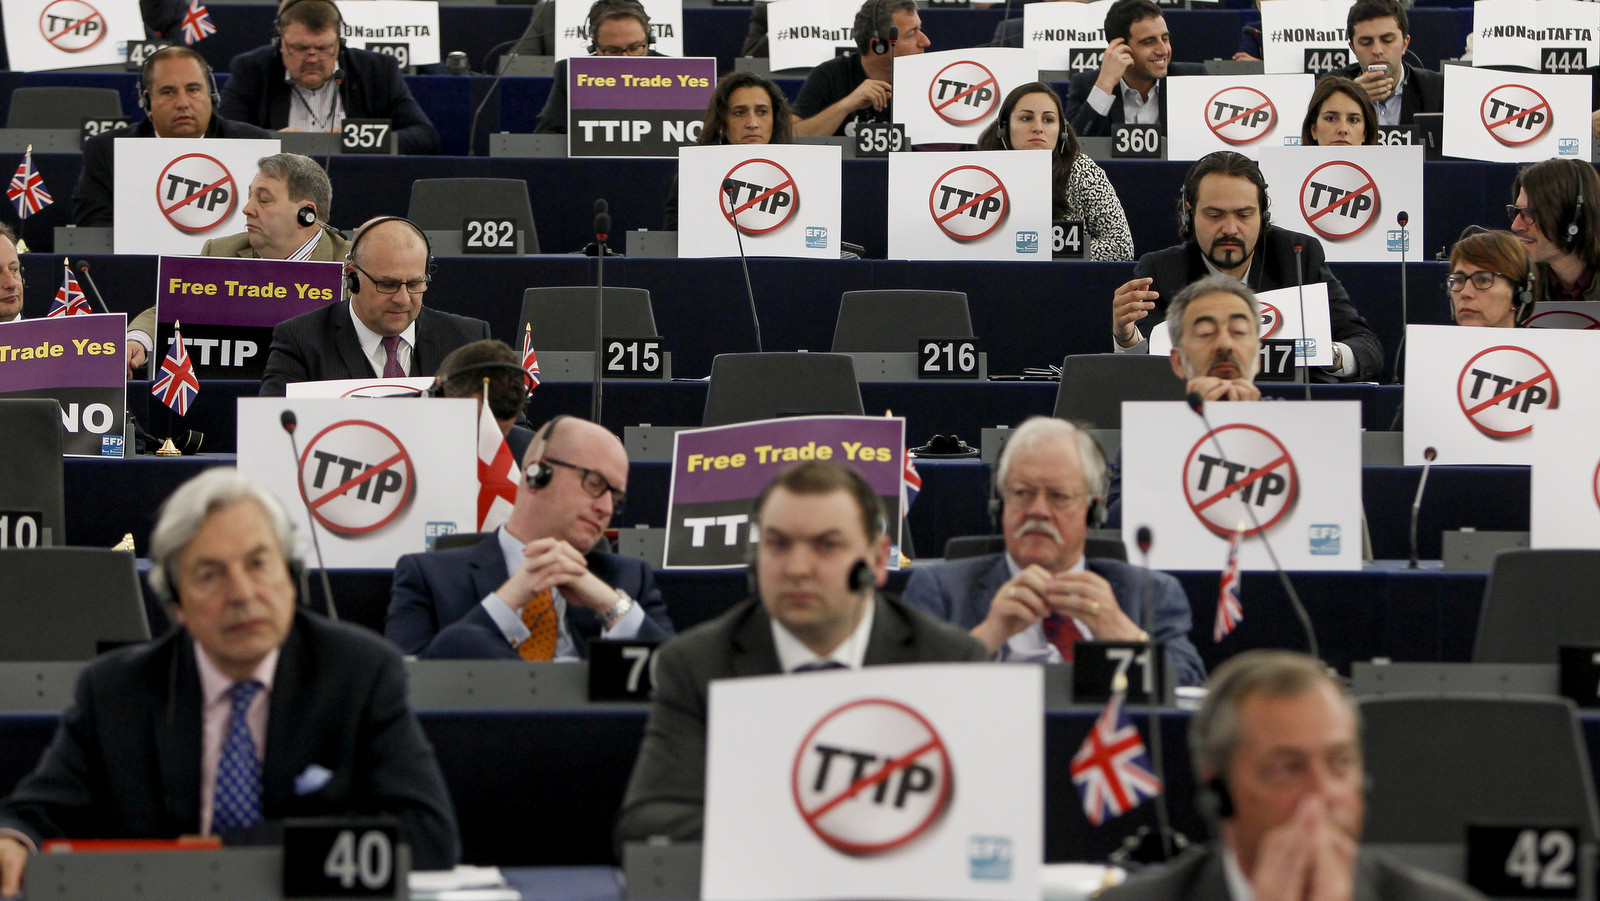 Seats with EU Parliament members with anti-TTIP signs 